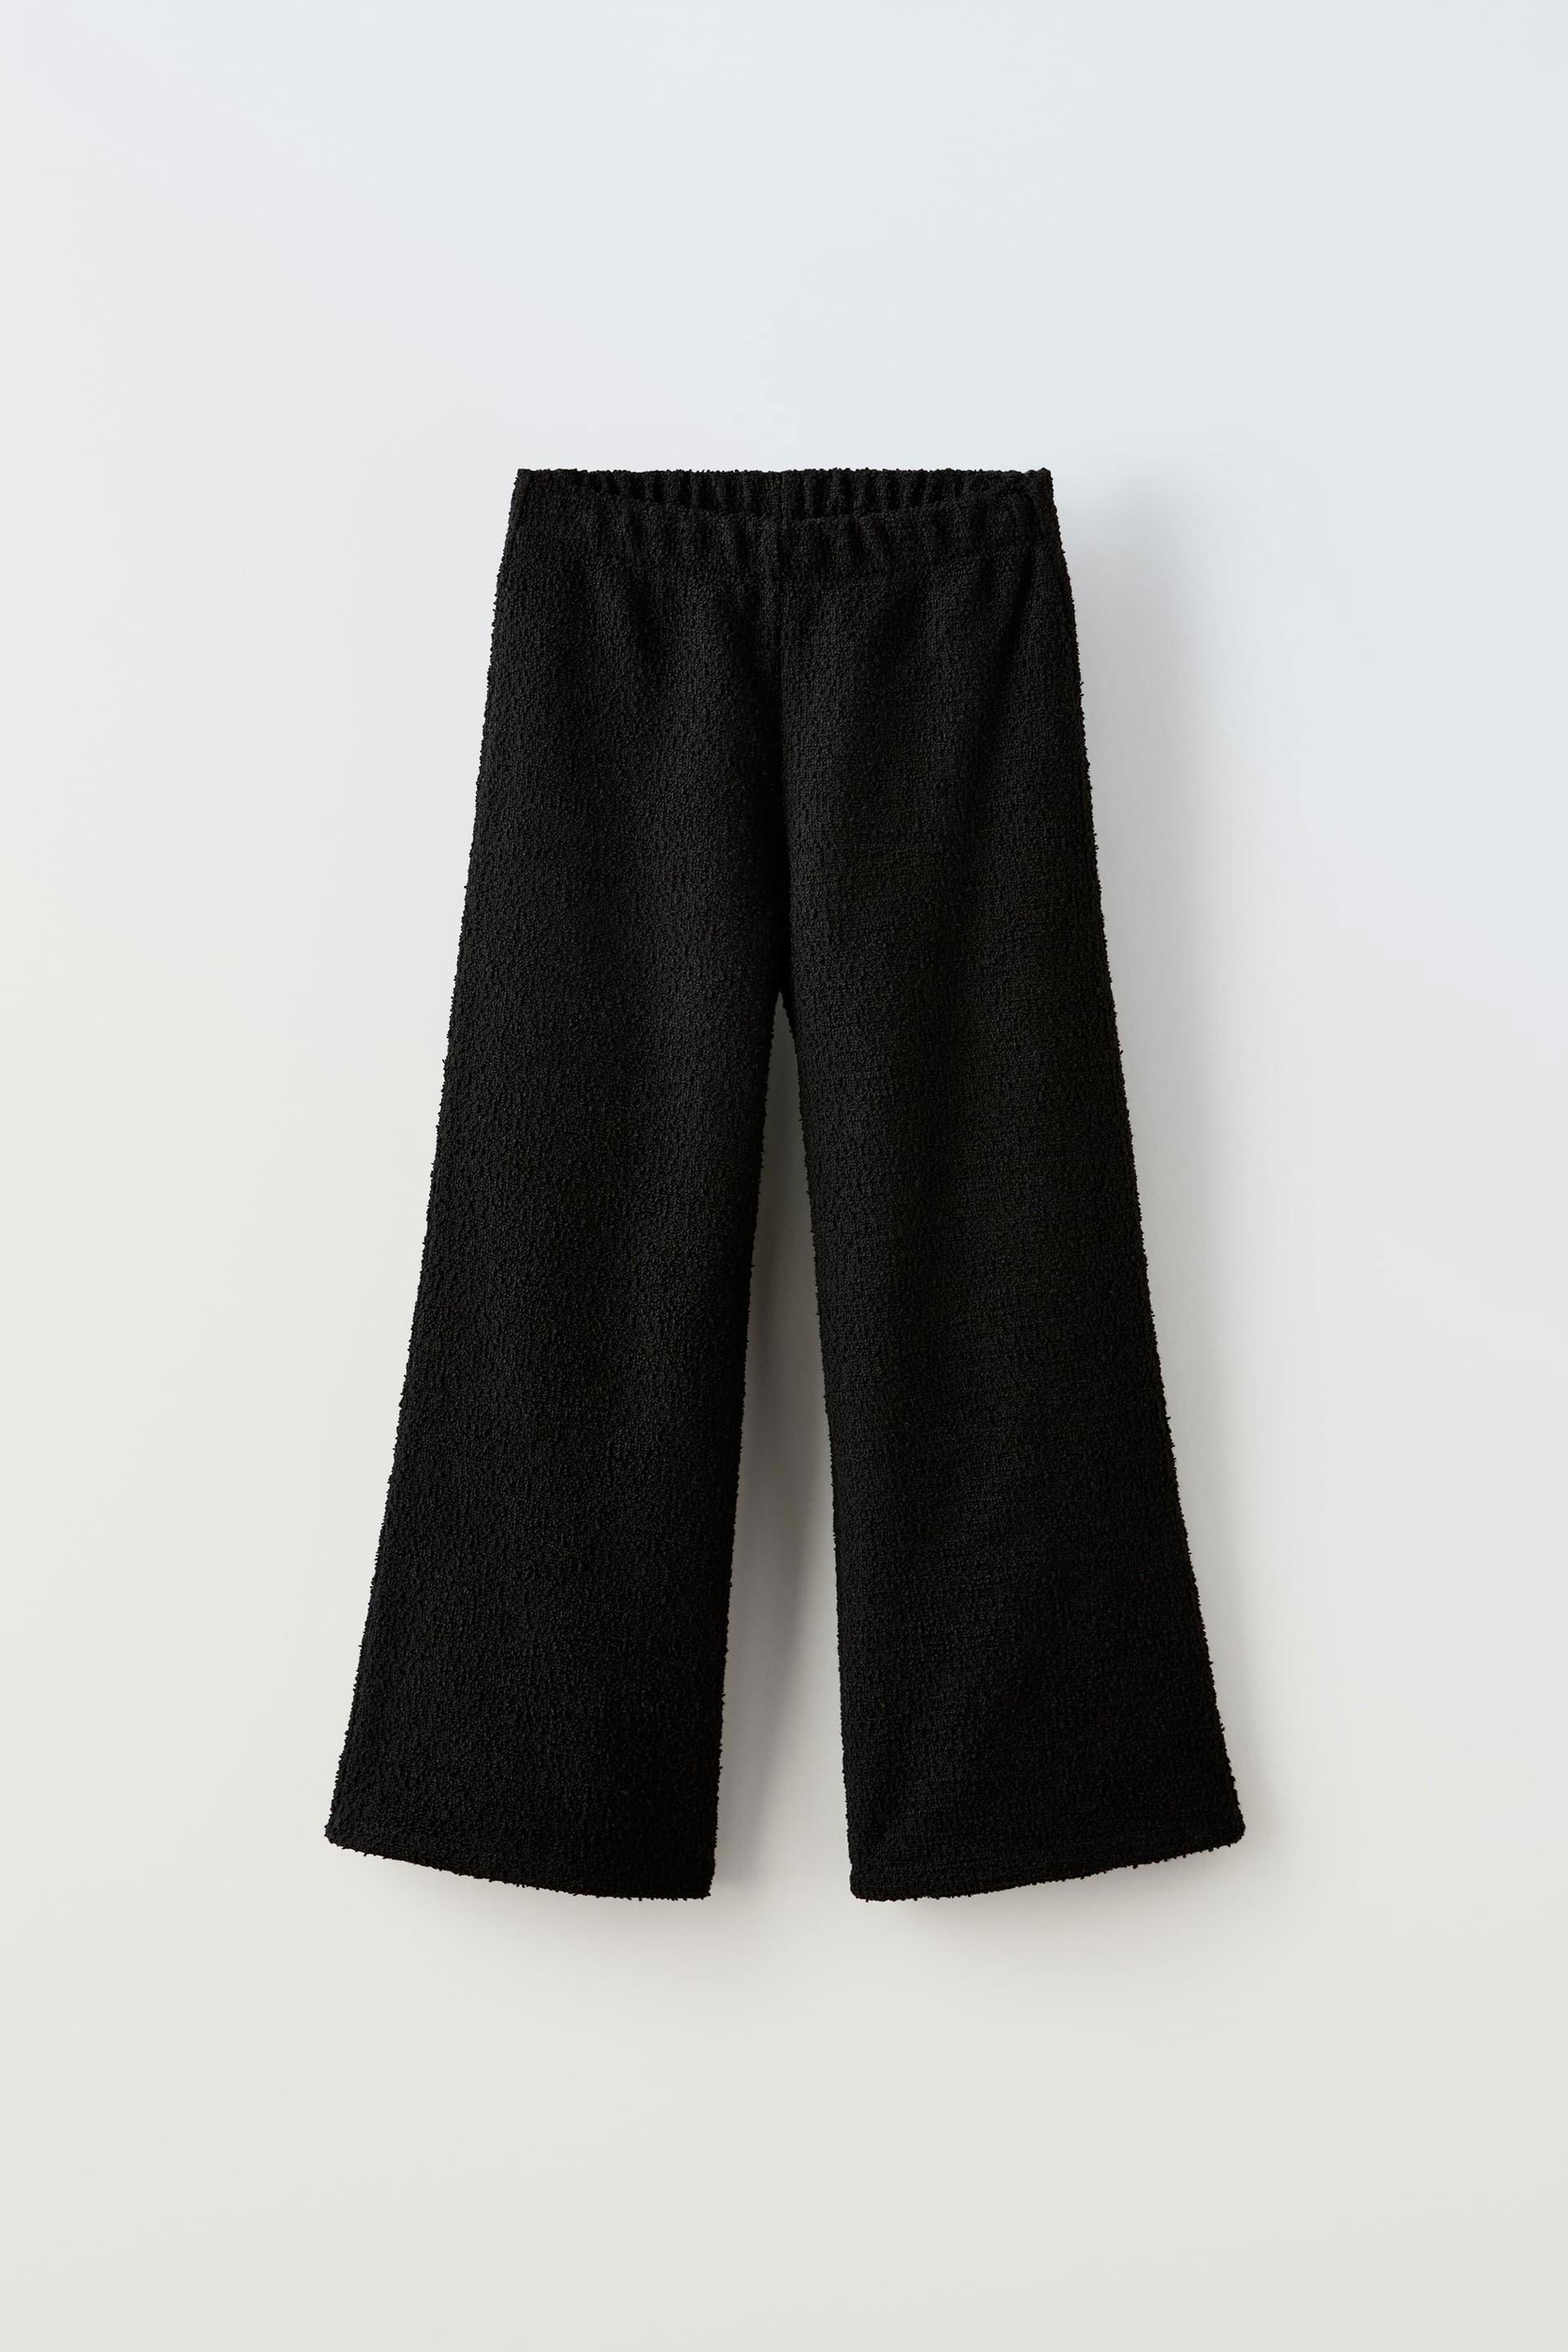 TEXTURED PANTS by ZARA